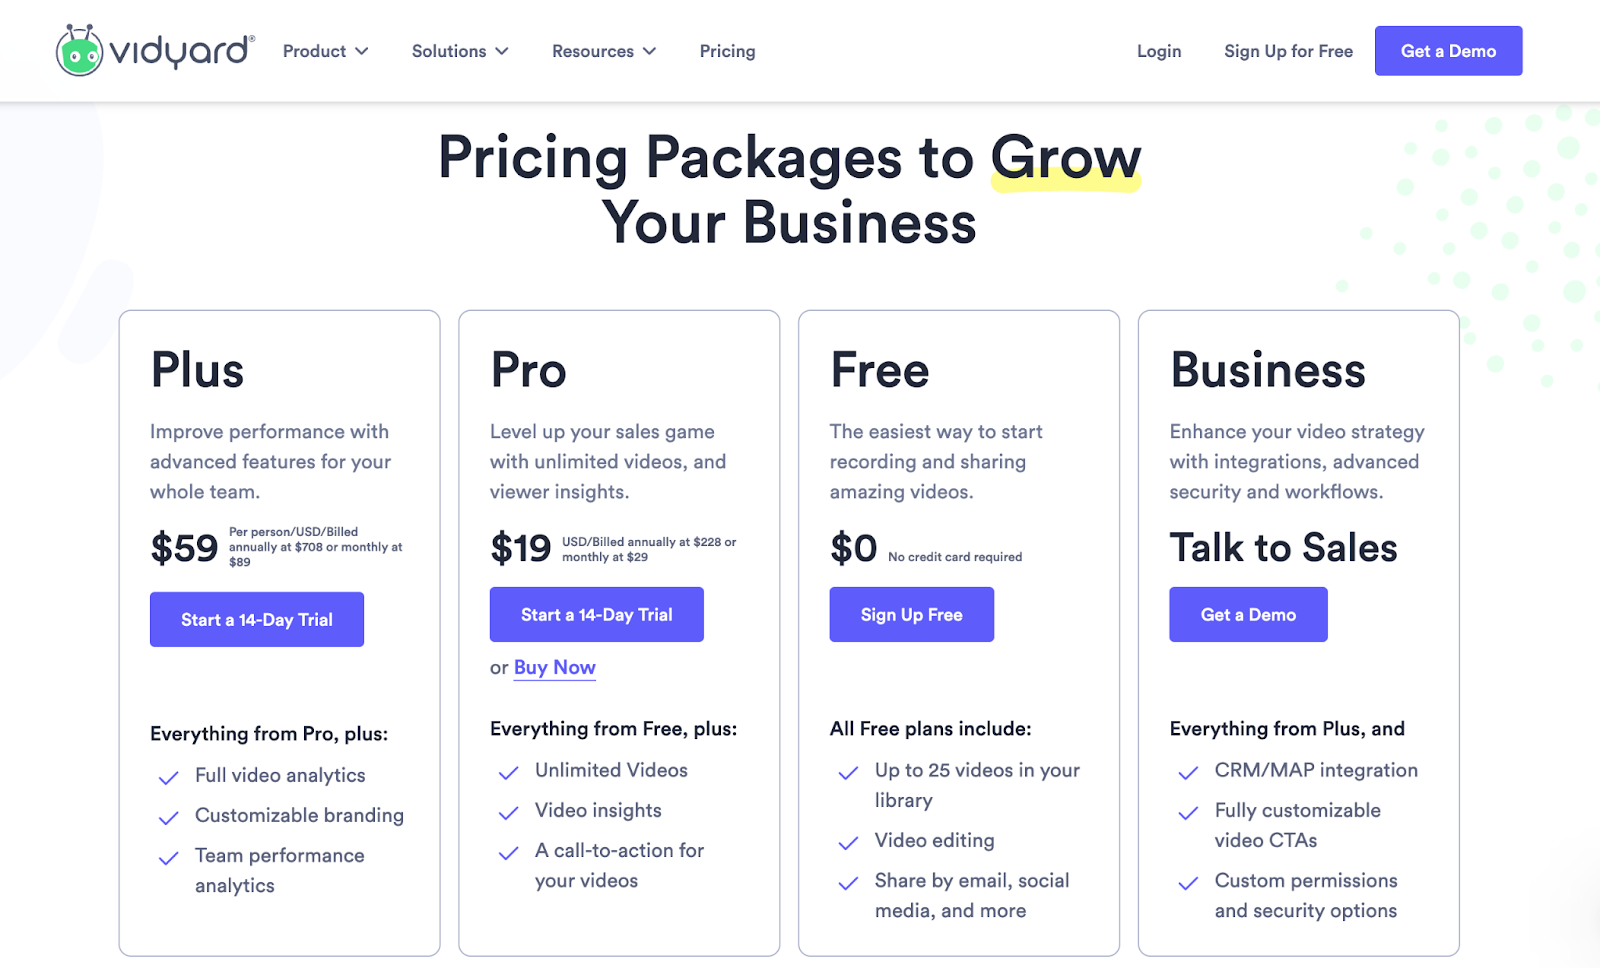 Pricing packages for Vidyard offering a 14-day free trial.